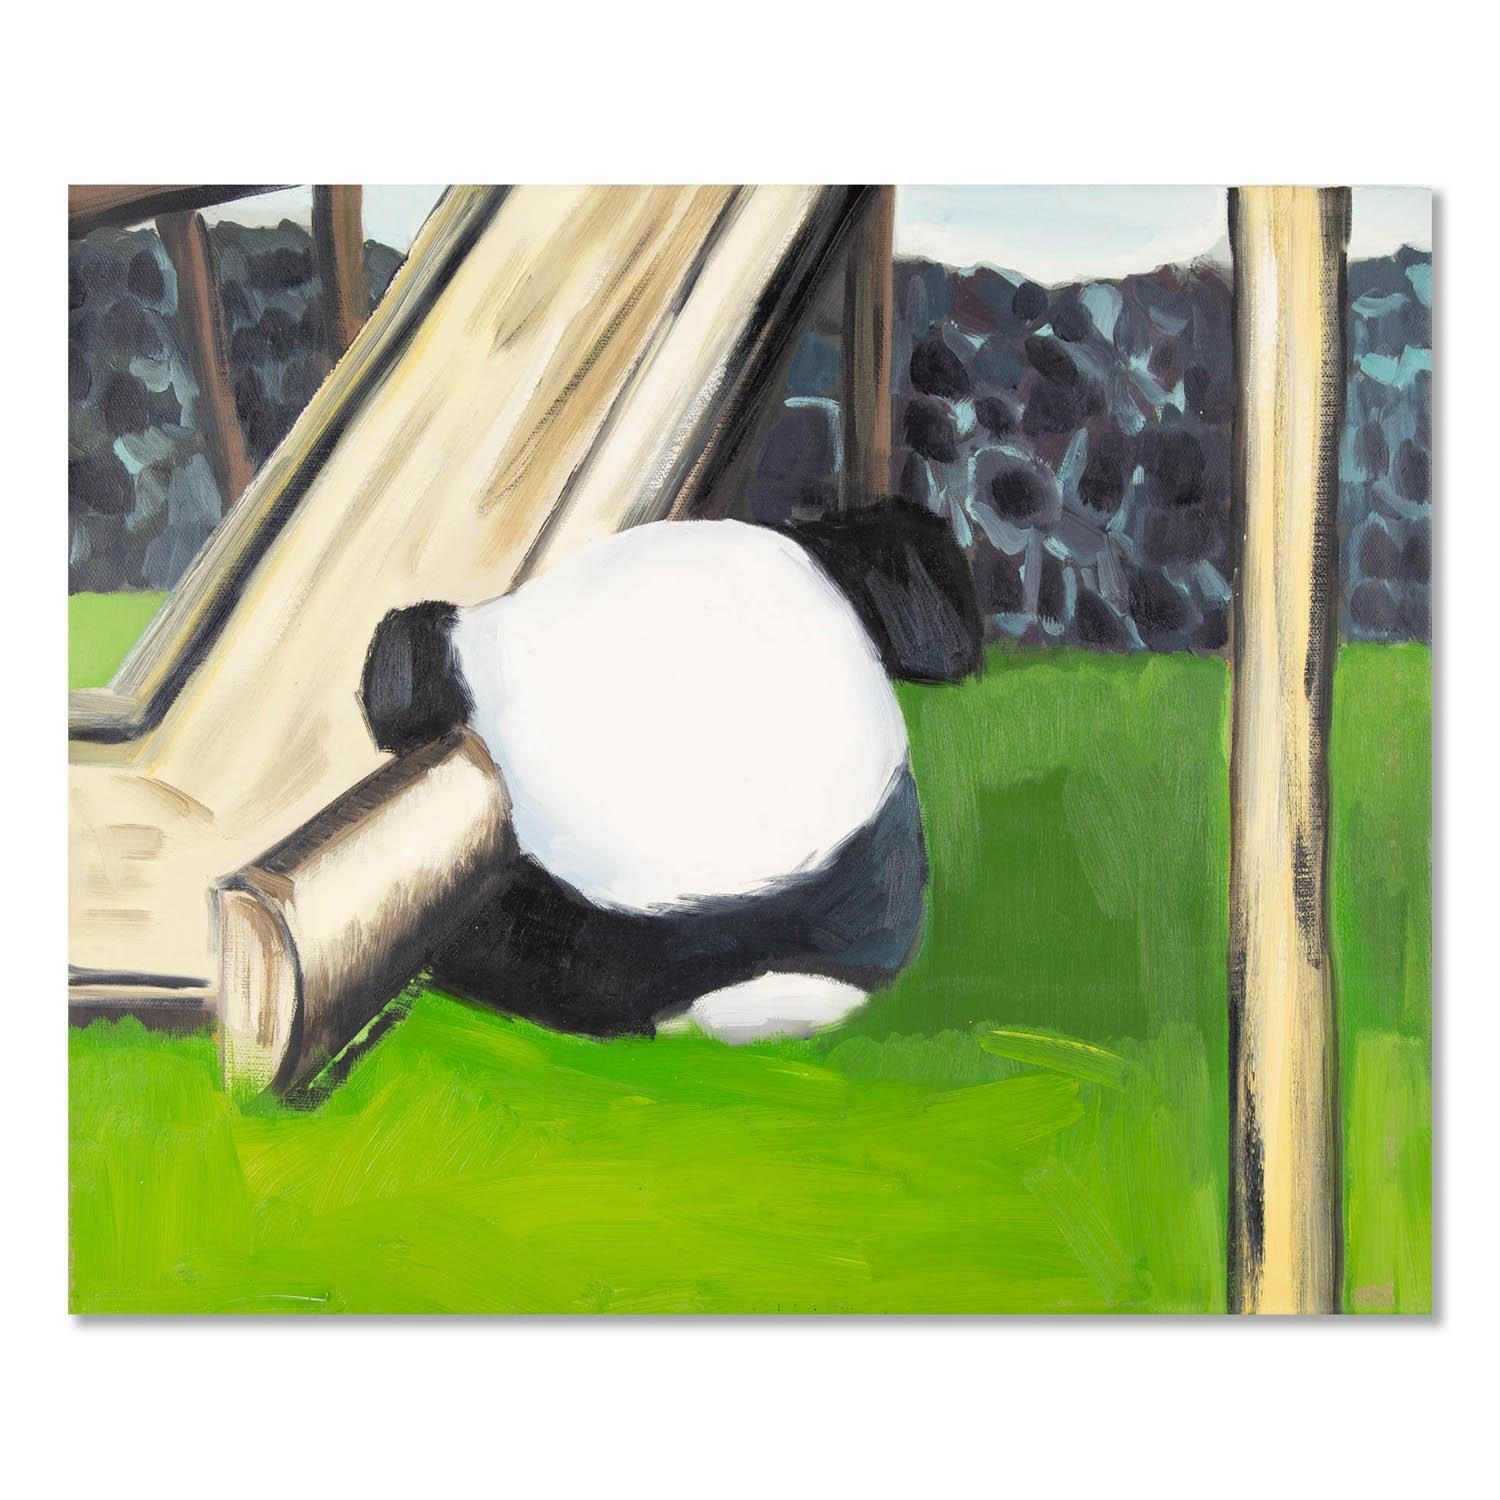  Title: Baby Panda Play Itself
 Medium: Oil on canvas
 Size: 19 x 23 inches
 Frame: Framing options available!
 Condition: The painting appears to be in excellent condition.
 
 Year: 2000 Circa
 Artist: Jin Liu
 Signature: Unsigned
 Signature